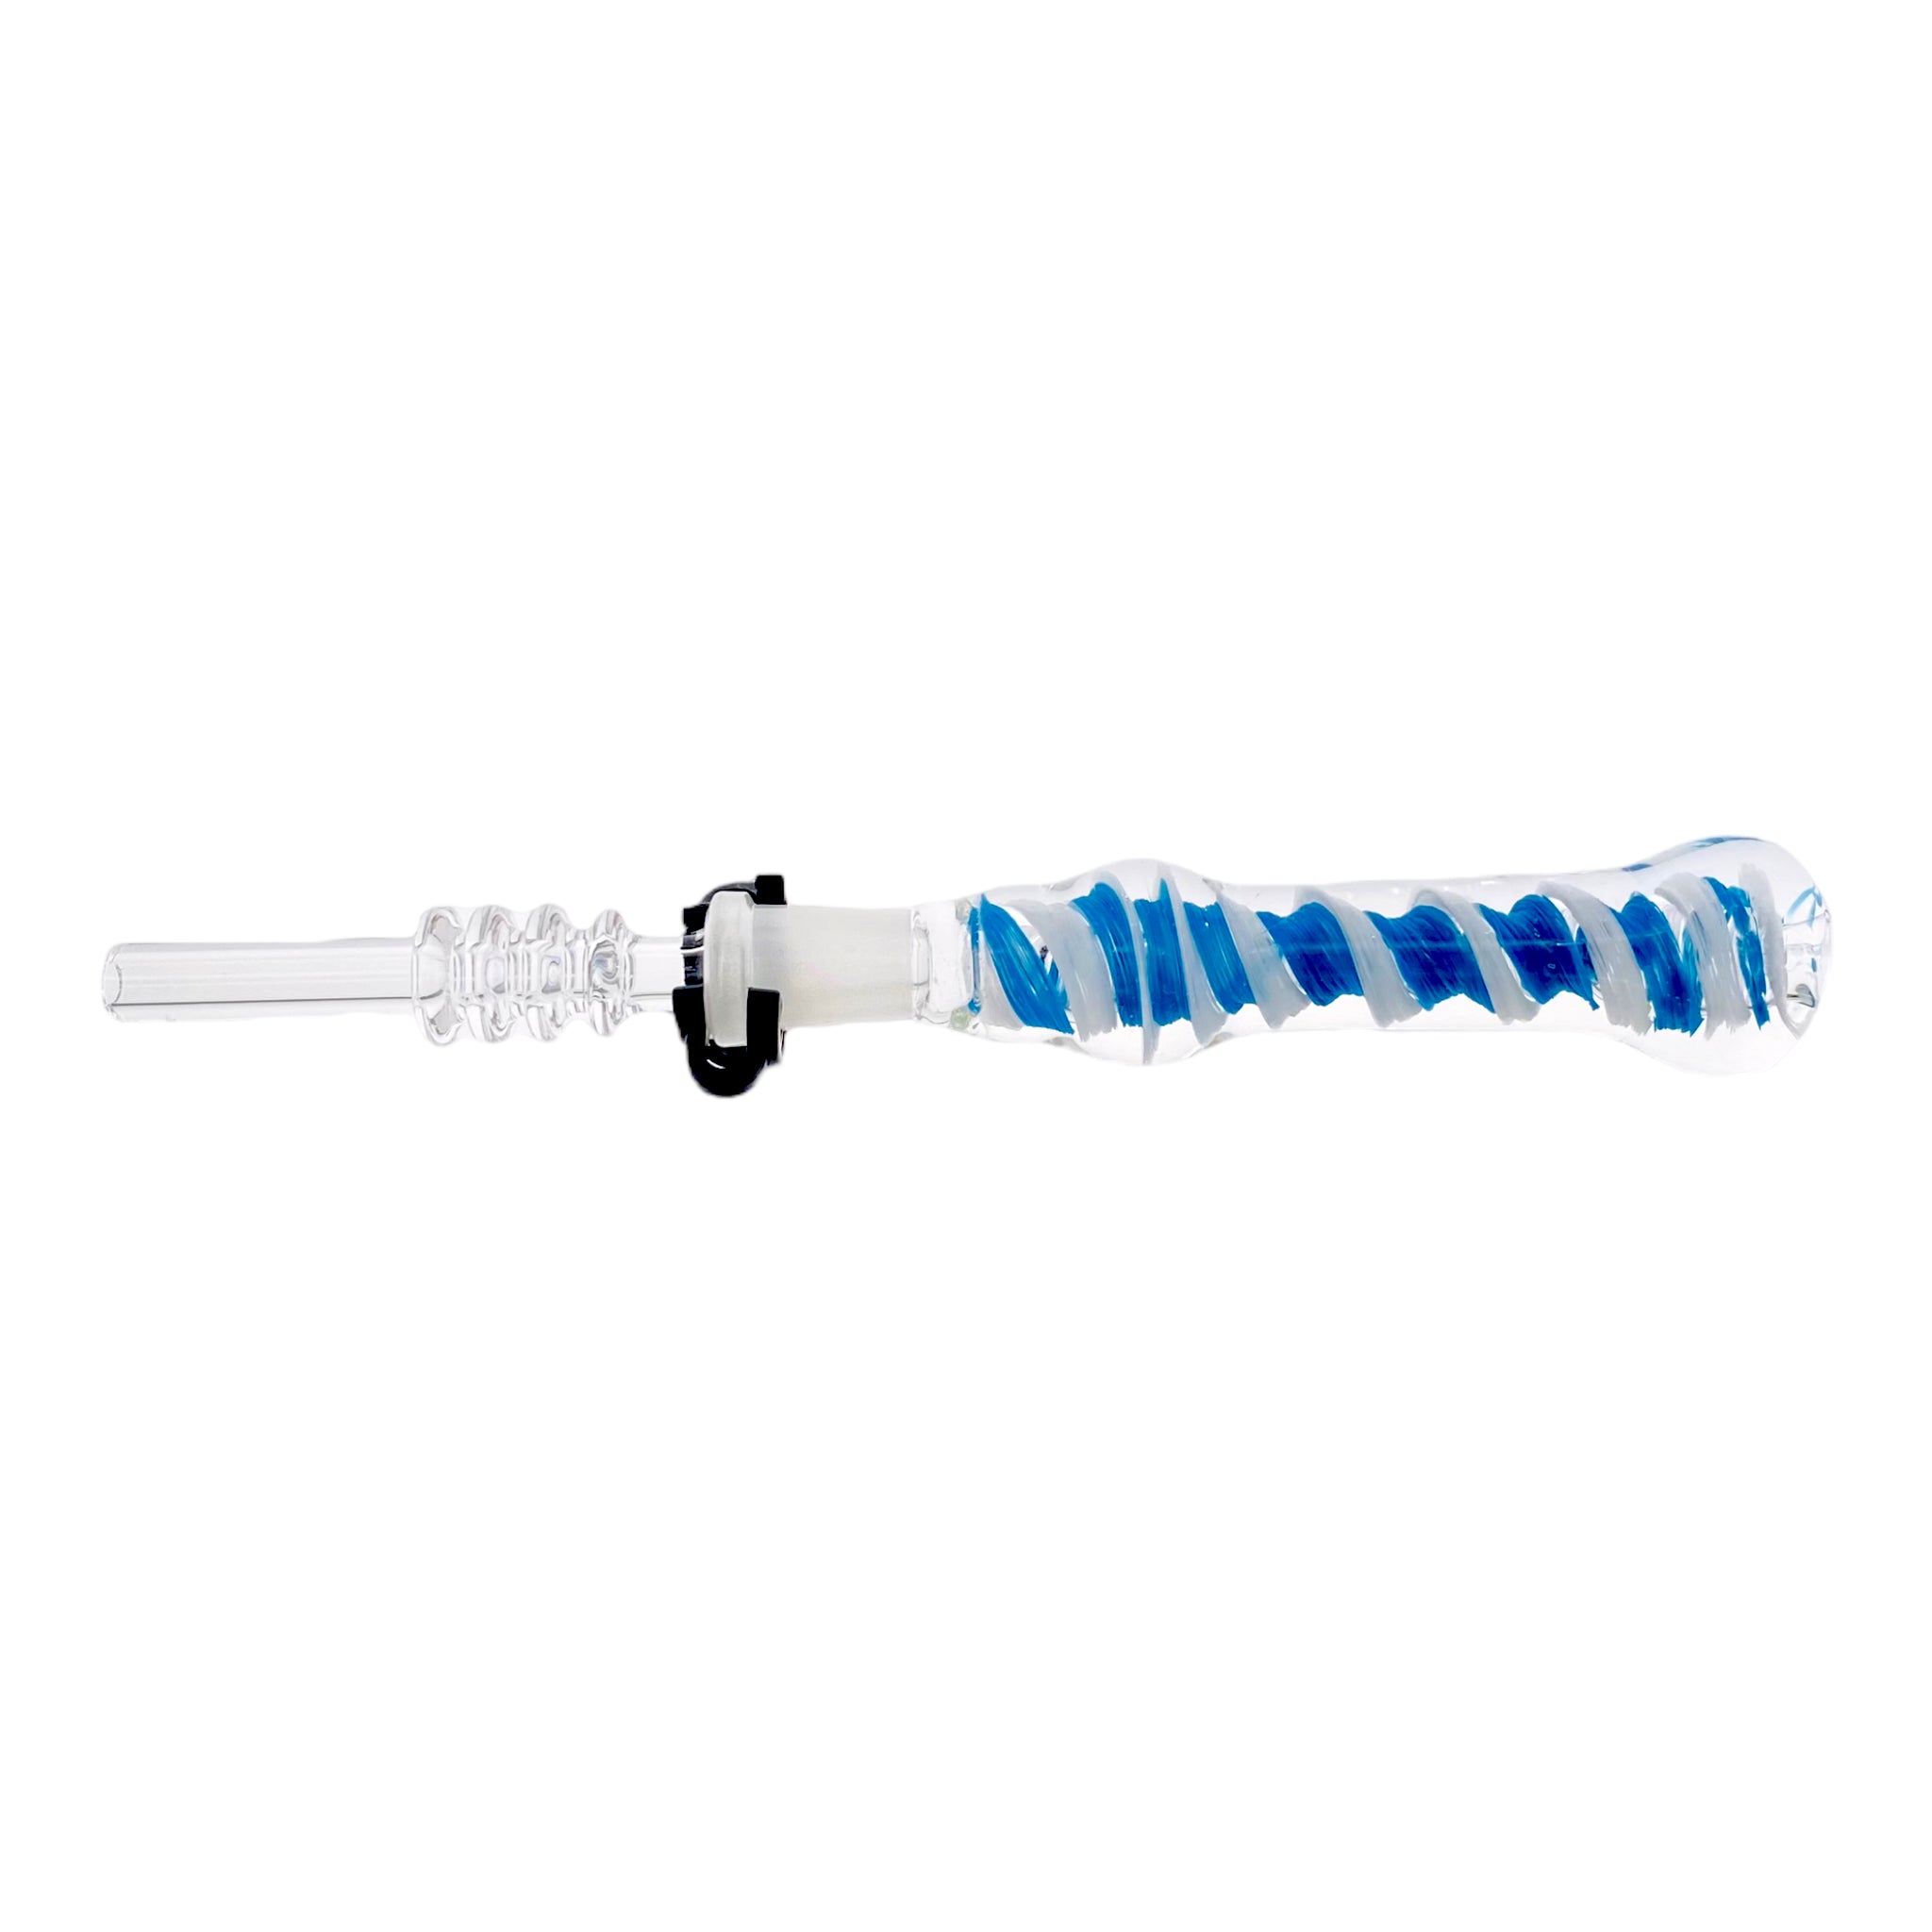 10mm Nectar Collector - Blue And White Inside Out With 10mm Quartz Tip